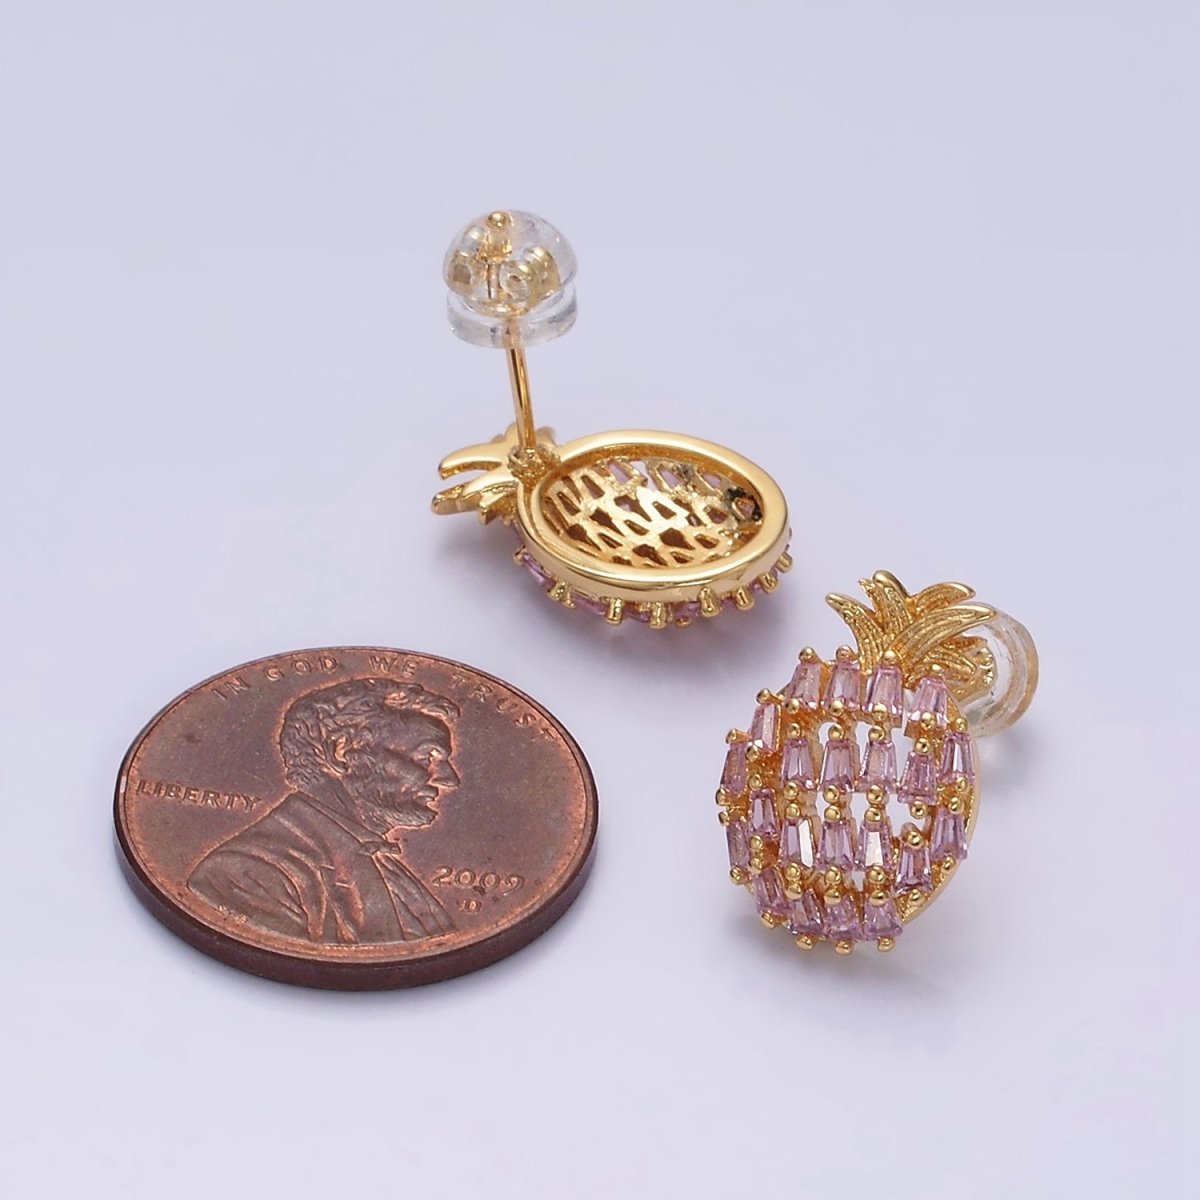 16K Gold Filled Pink Baguette CZ Pineapple Fruit Stud Earrings in Gold & Silver | AD968 AD969 - DLUXCA